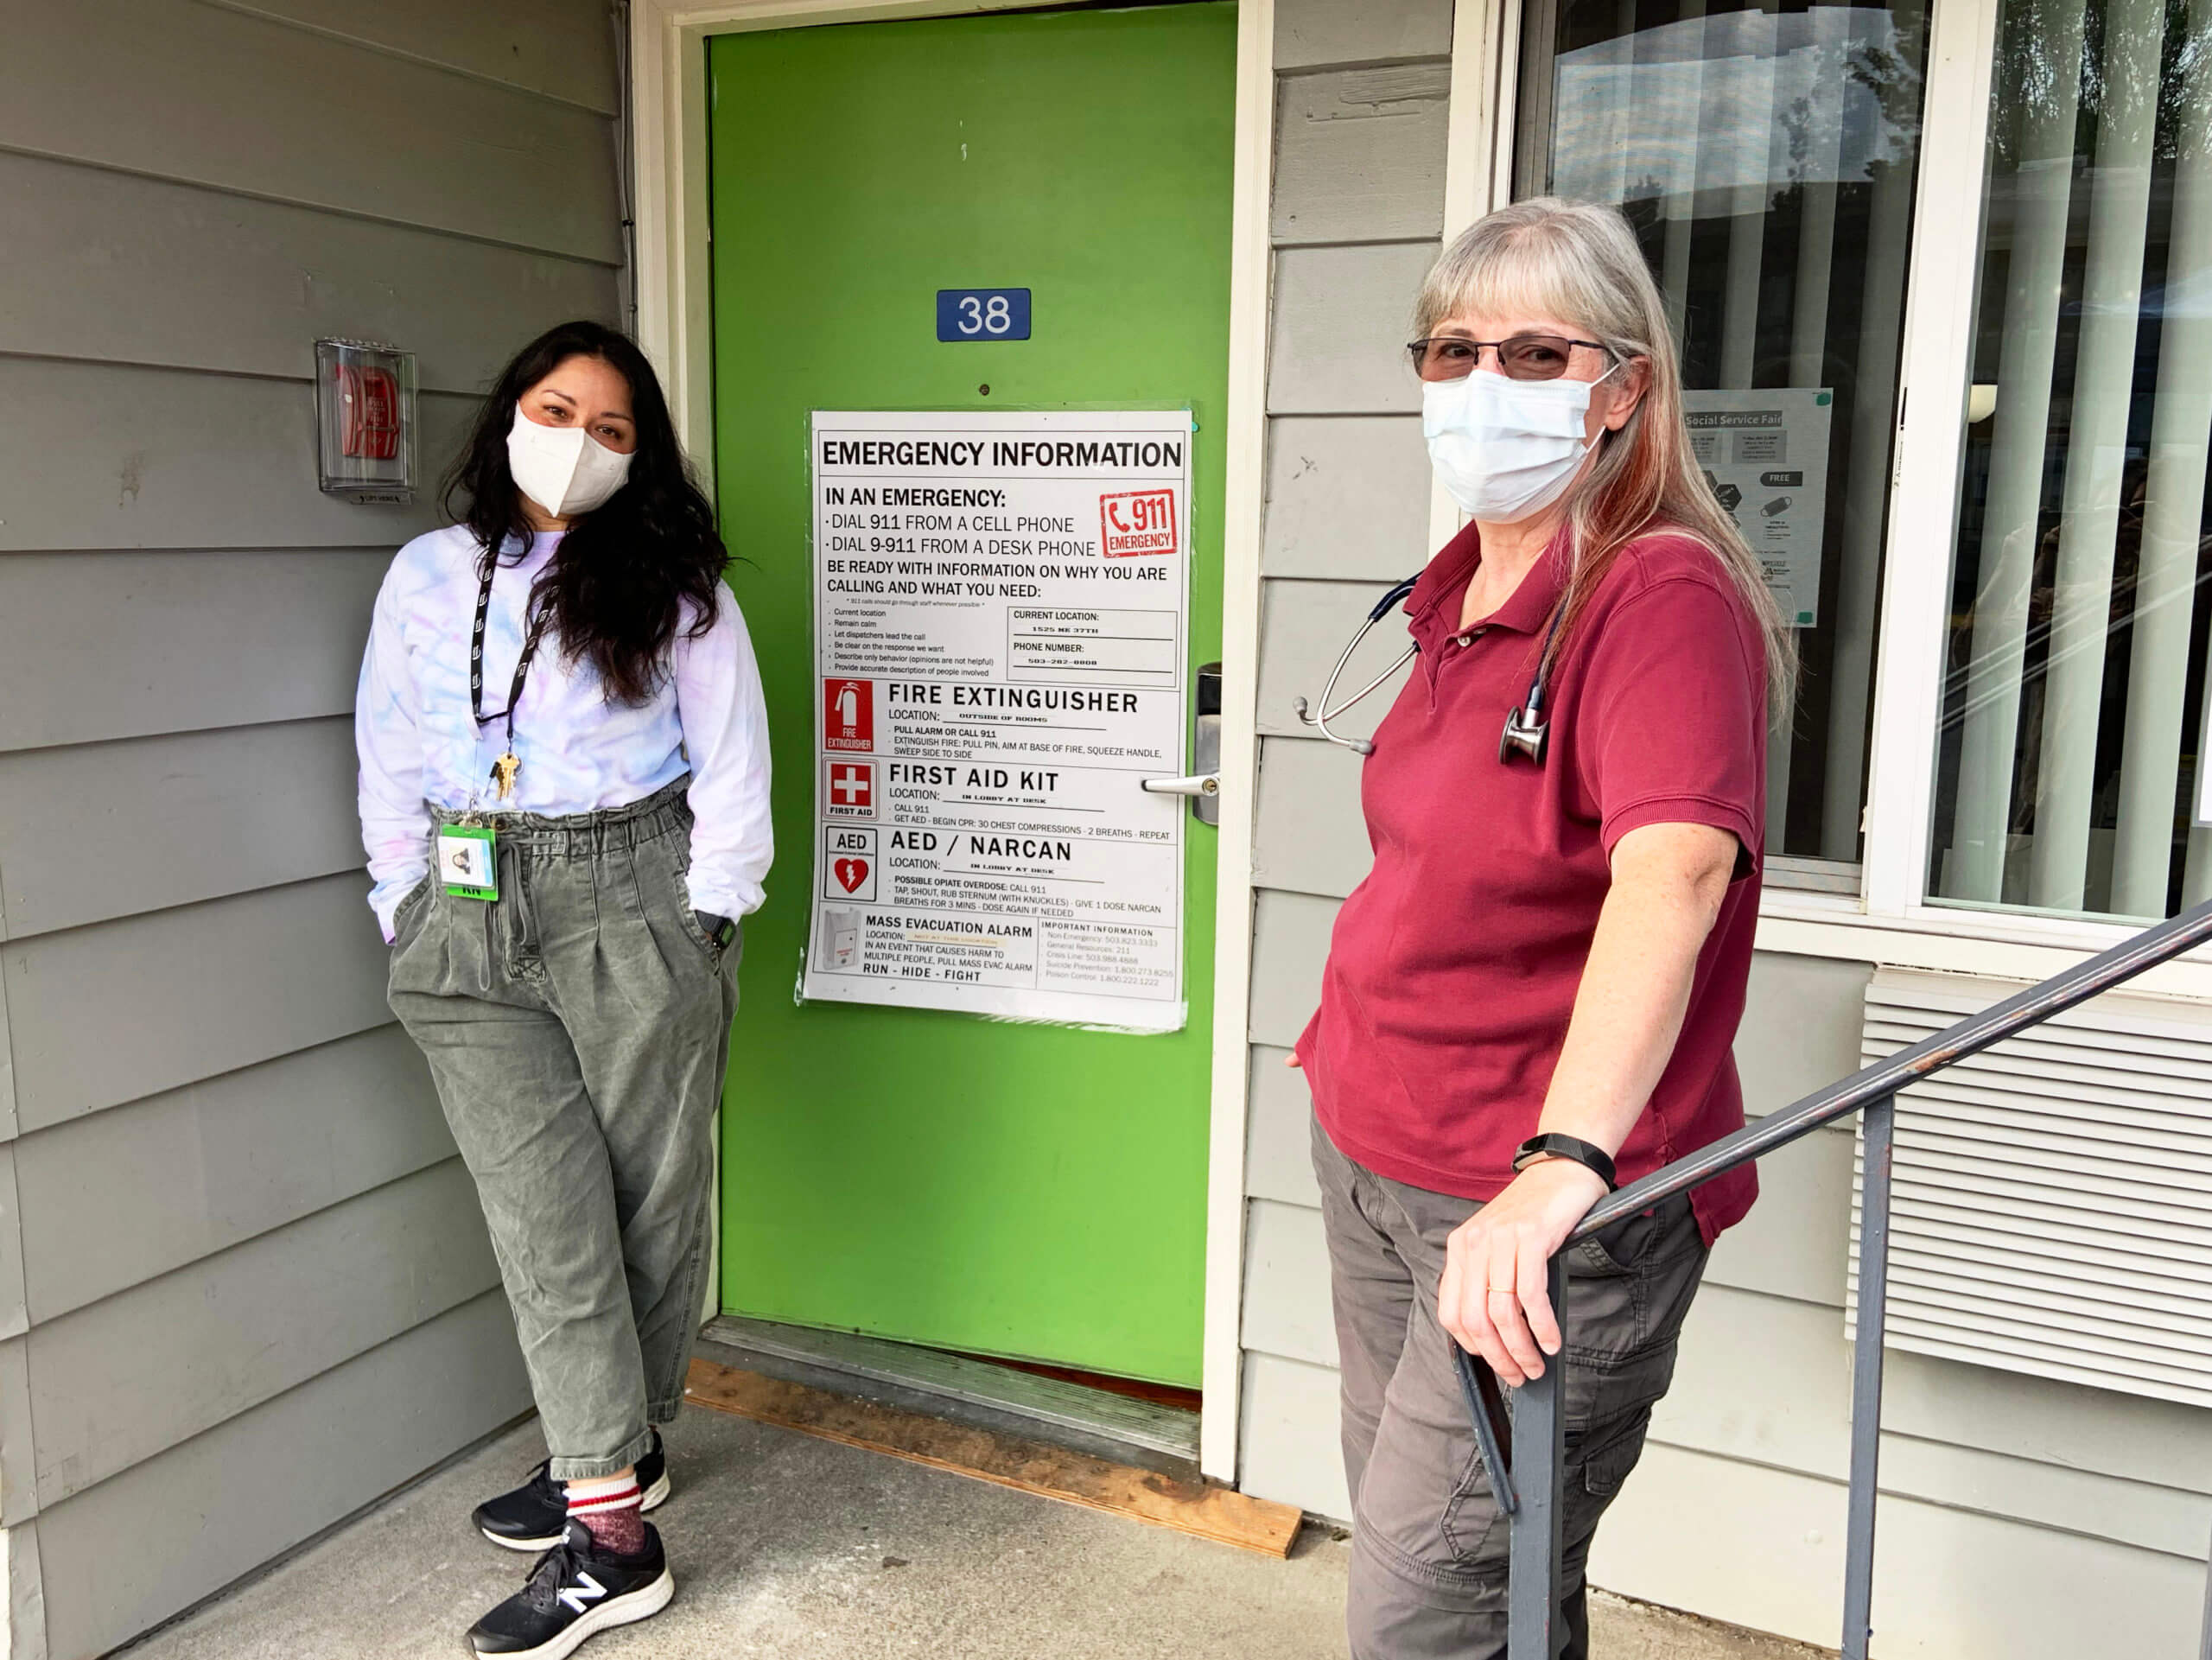 Pat Buckley, PA-C, ND, WCC (at right) and Treva Drake, BSN, RN (at left), are a tight-knit team supporting chronically ill homeless individuals in better managing their conditions so they can stay healthier and avoid hospitalization.